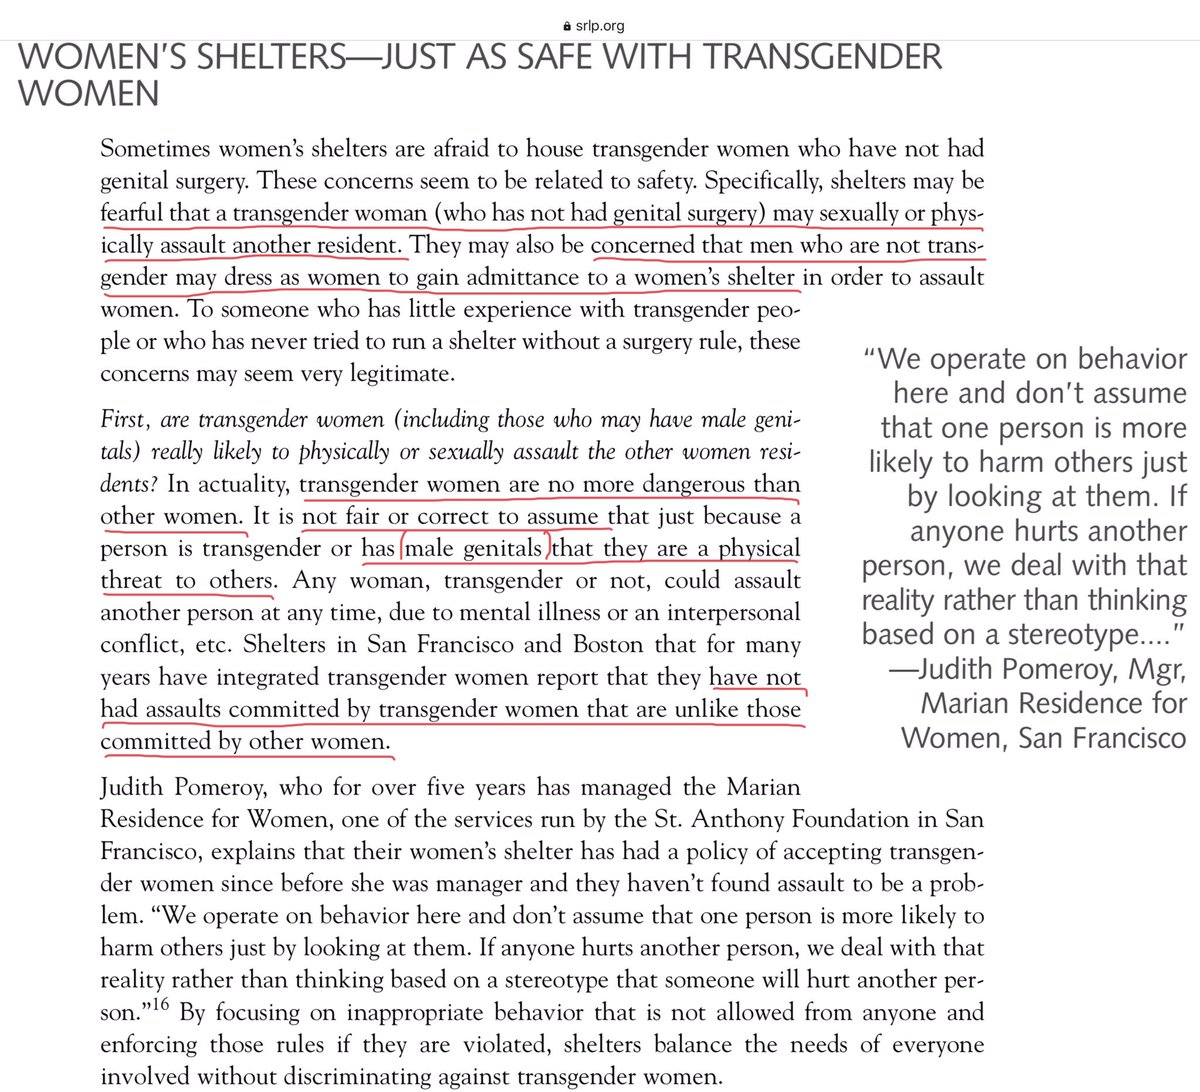 “Women’s shelters—just as safe with transgender women,” the headline insists, on page 13. “It is not fair or correct to assume that just because a person is transgender or has male genitals that they are a physical threat to others,” the report continues.